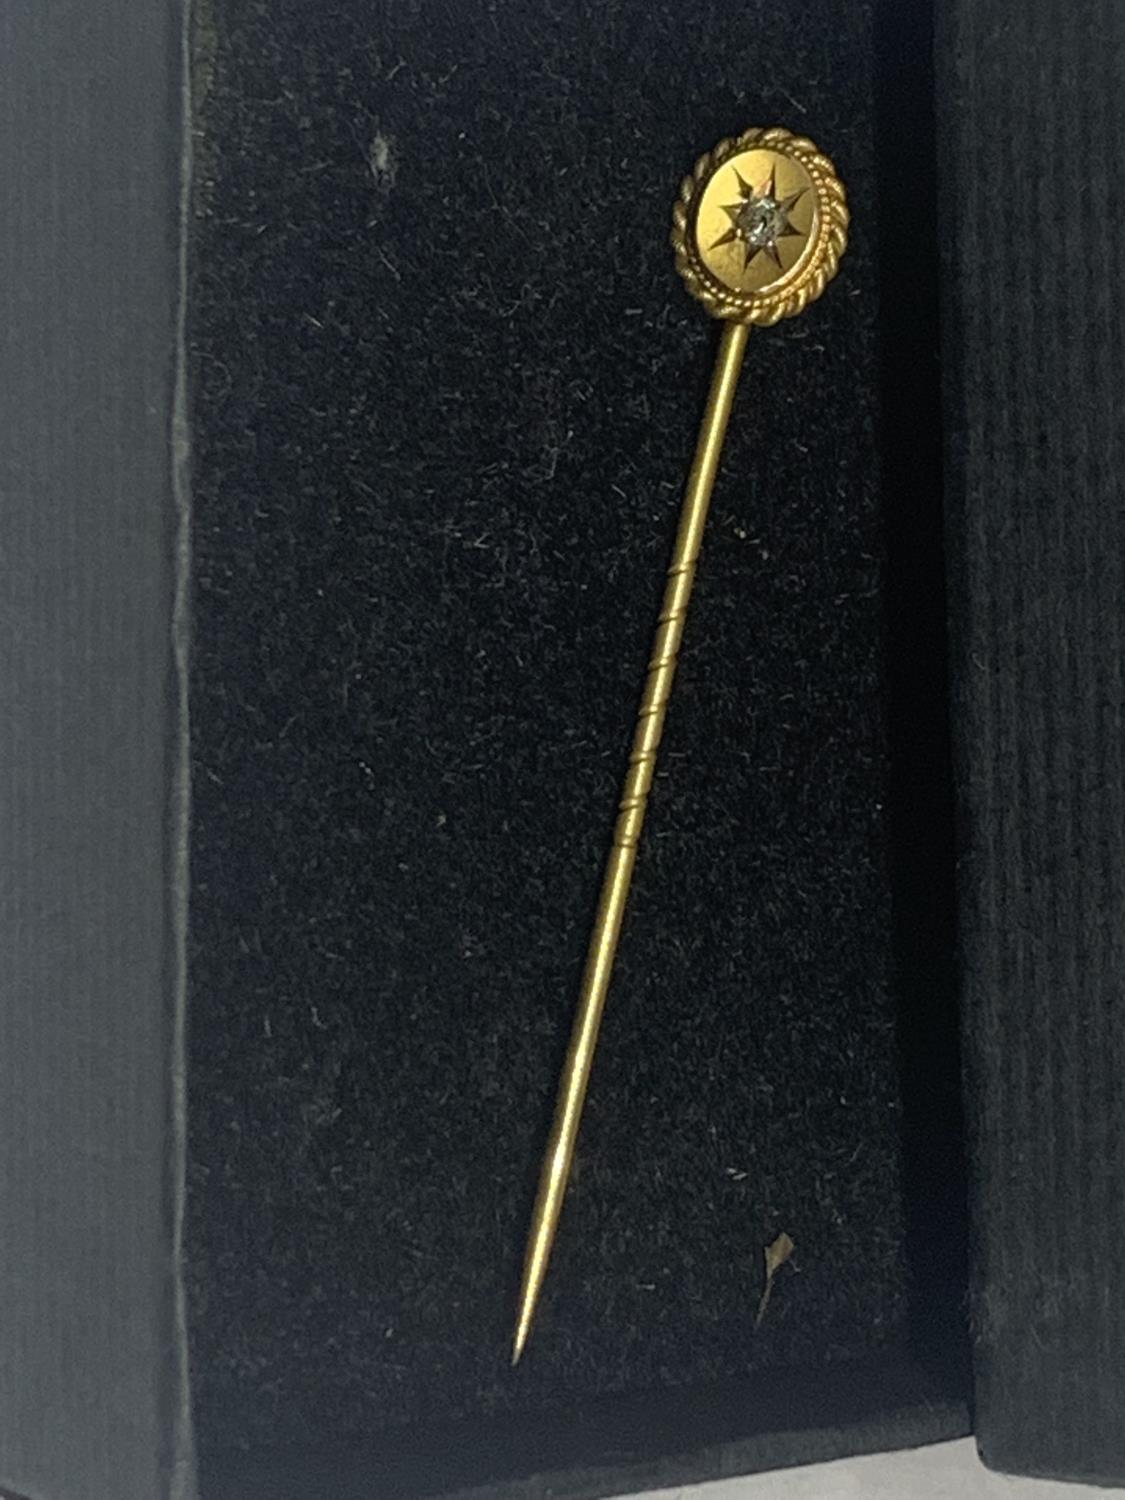 A 15 CARAT GOLD PIN BROOCH WITH A SOLITAIRE IN A PRESENTATION BOX